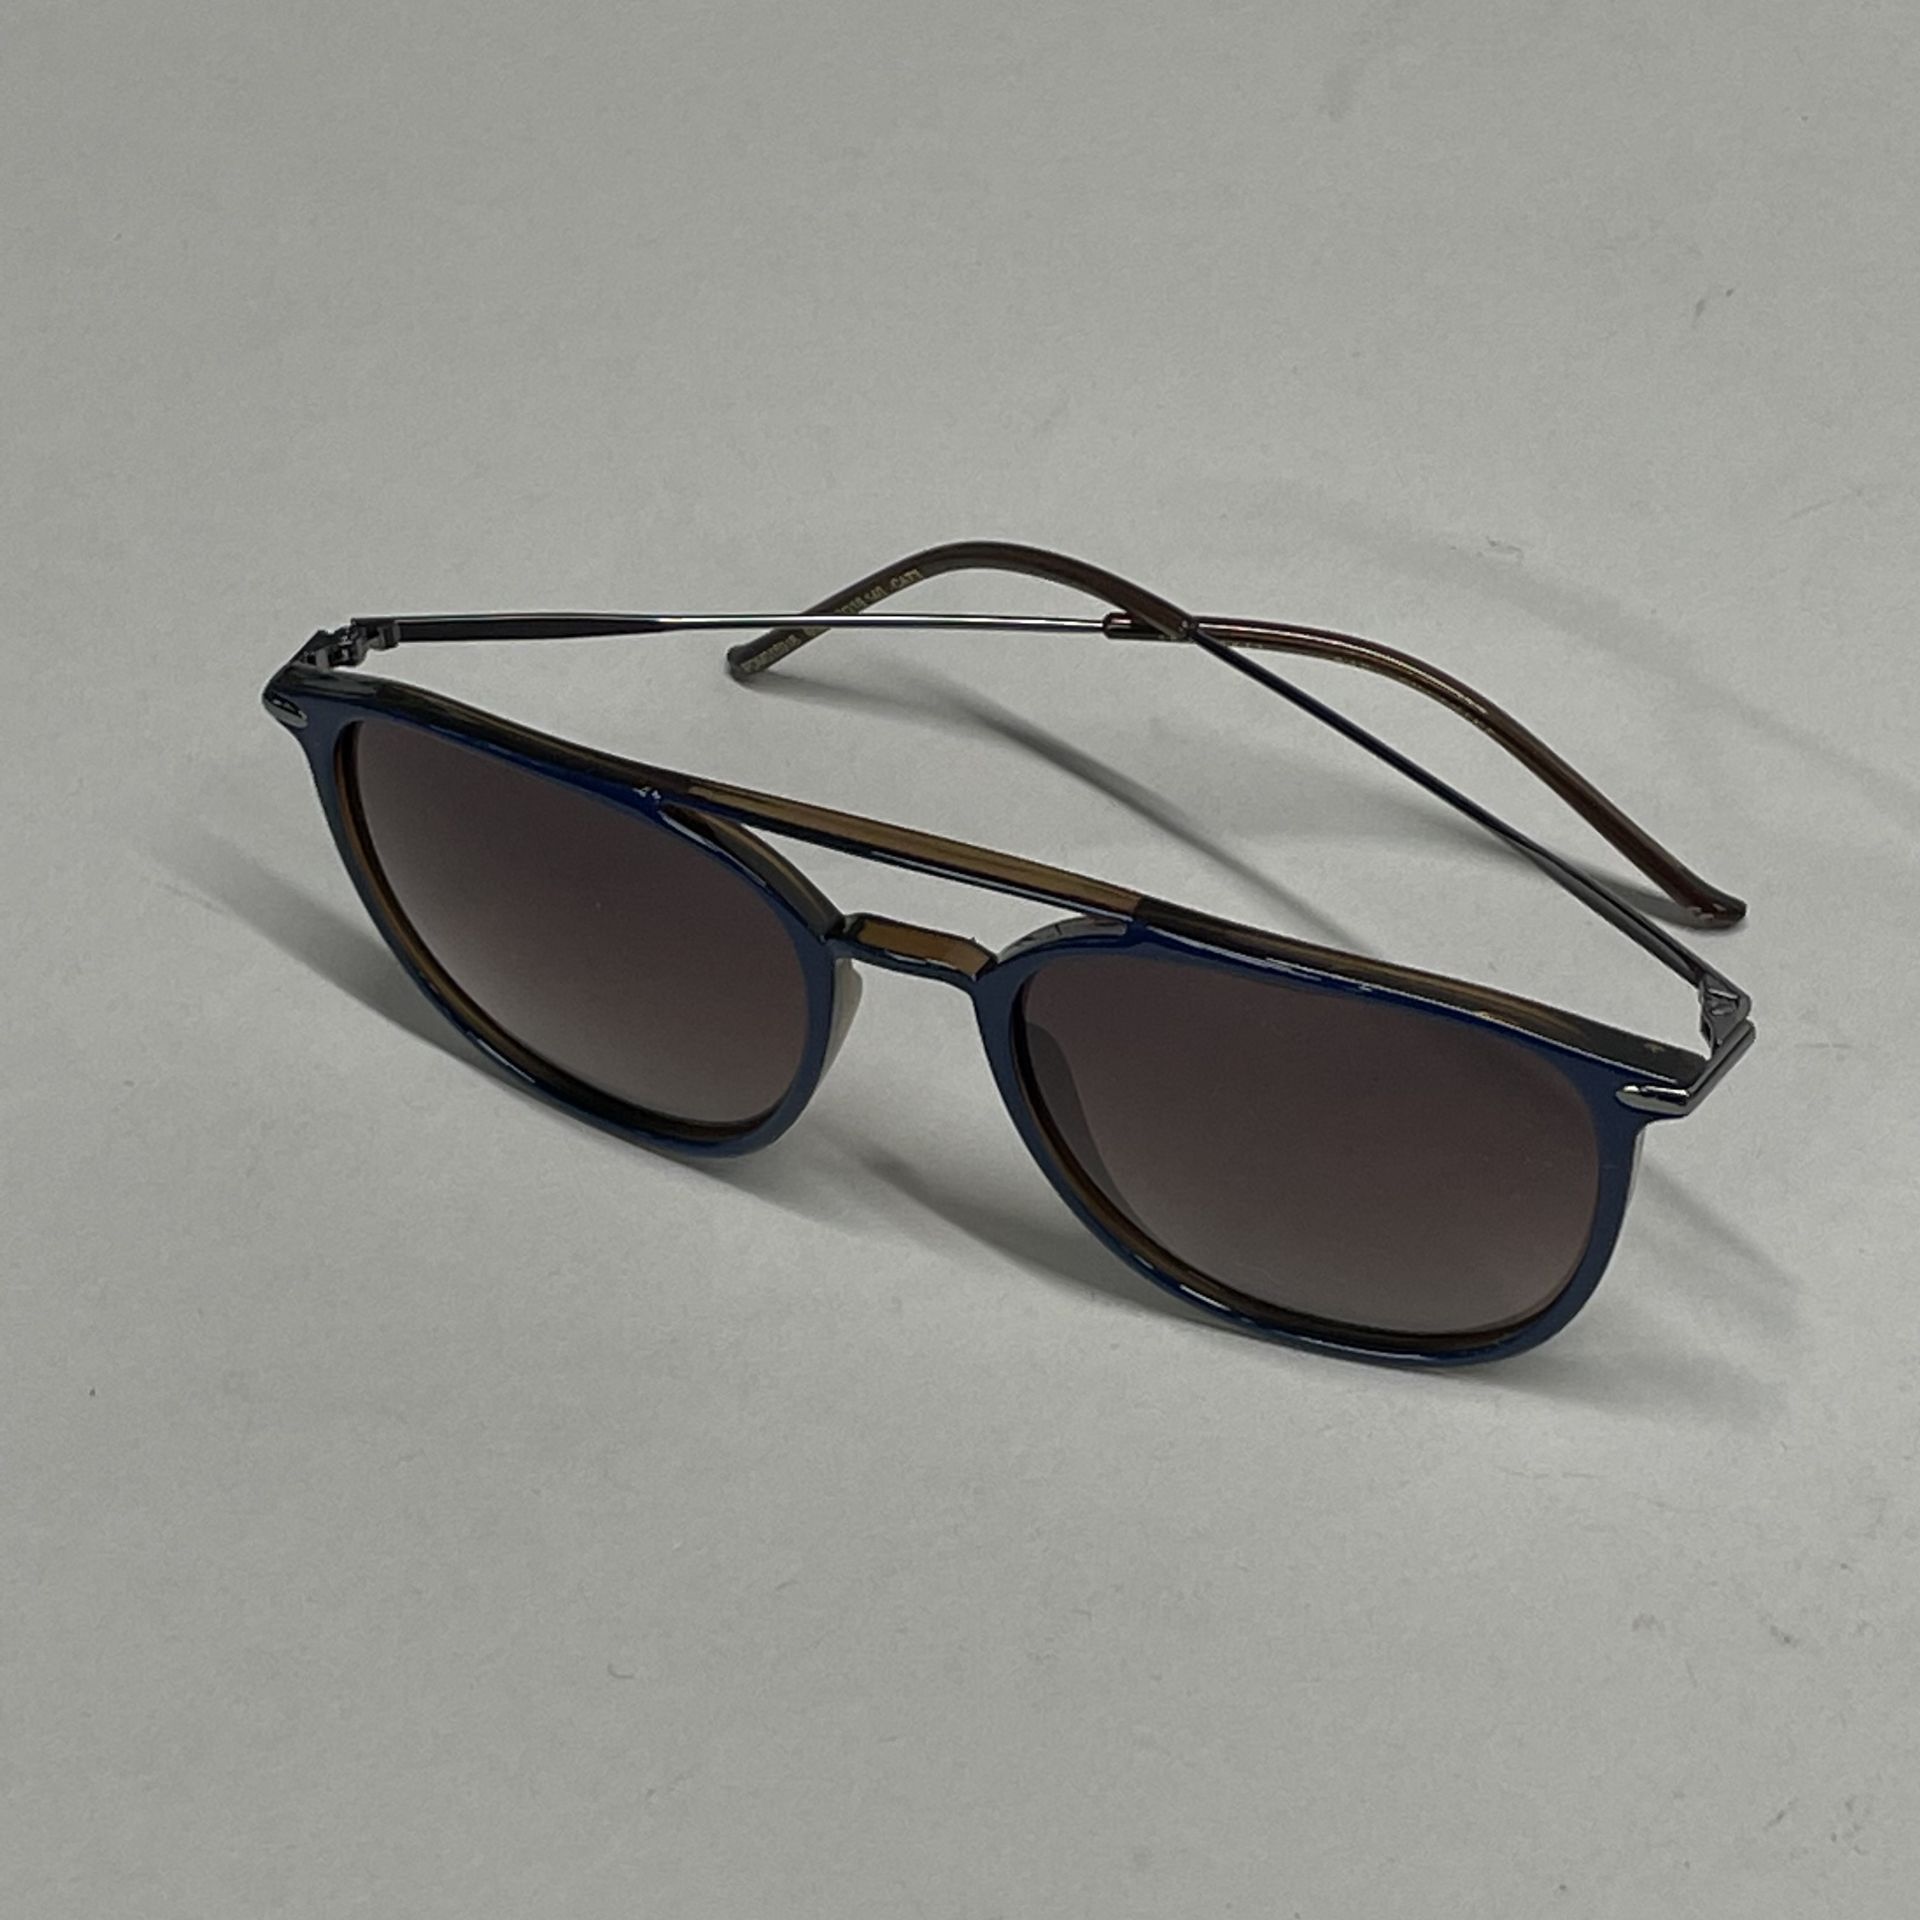 A pair of vintage Burberry sunglasses together with a pair of Ted Baker sunglasses. - Image 3 of 5